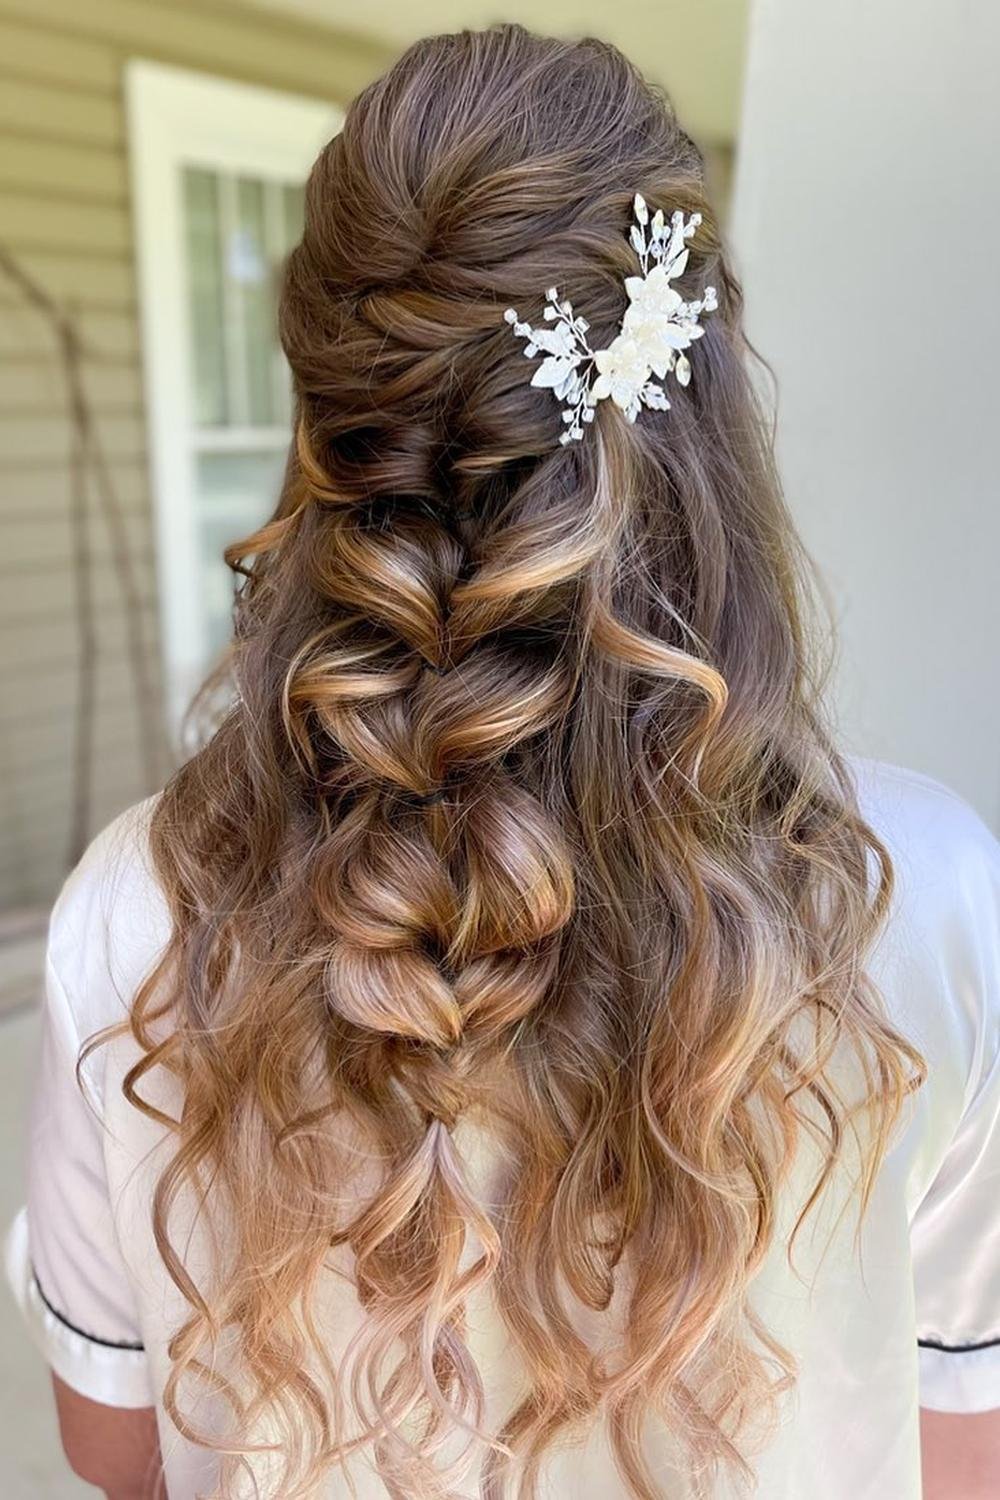 1 - Picture of Braided Hairstyles